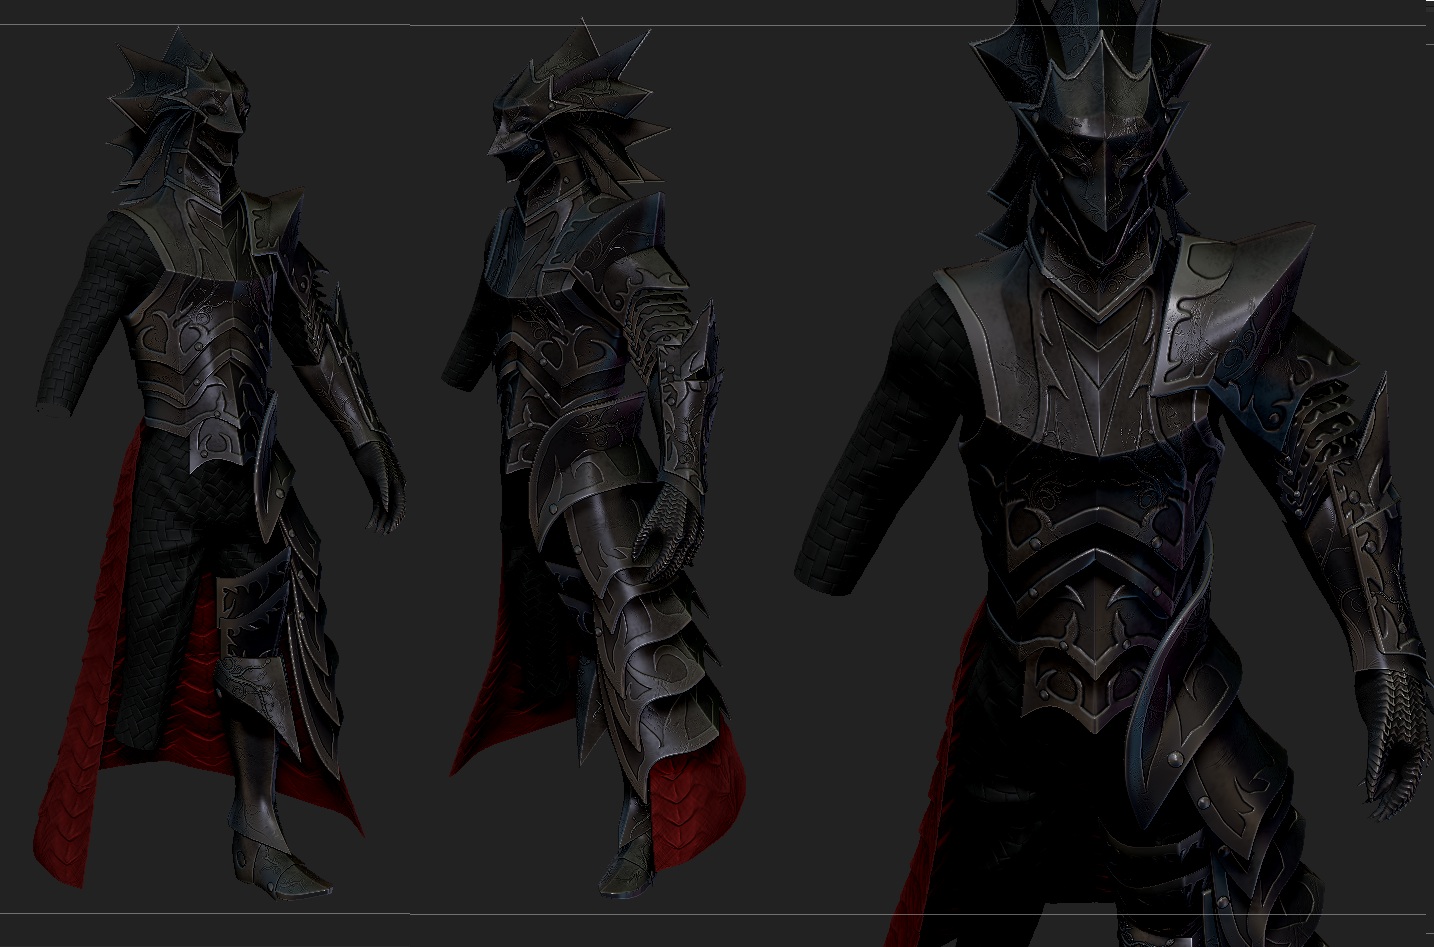 knight_of_thorns_steel_armor__for_skyrim_by_zerofrust-d5025ie.jpg